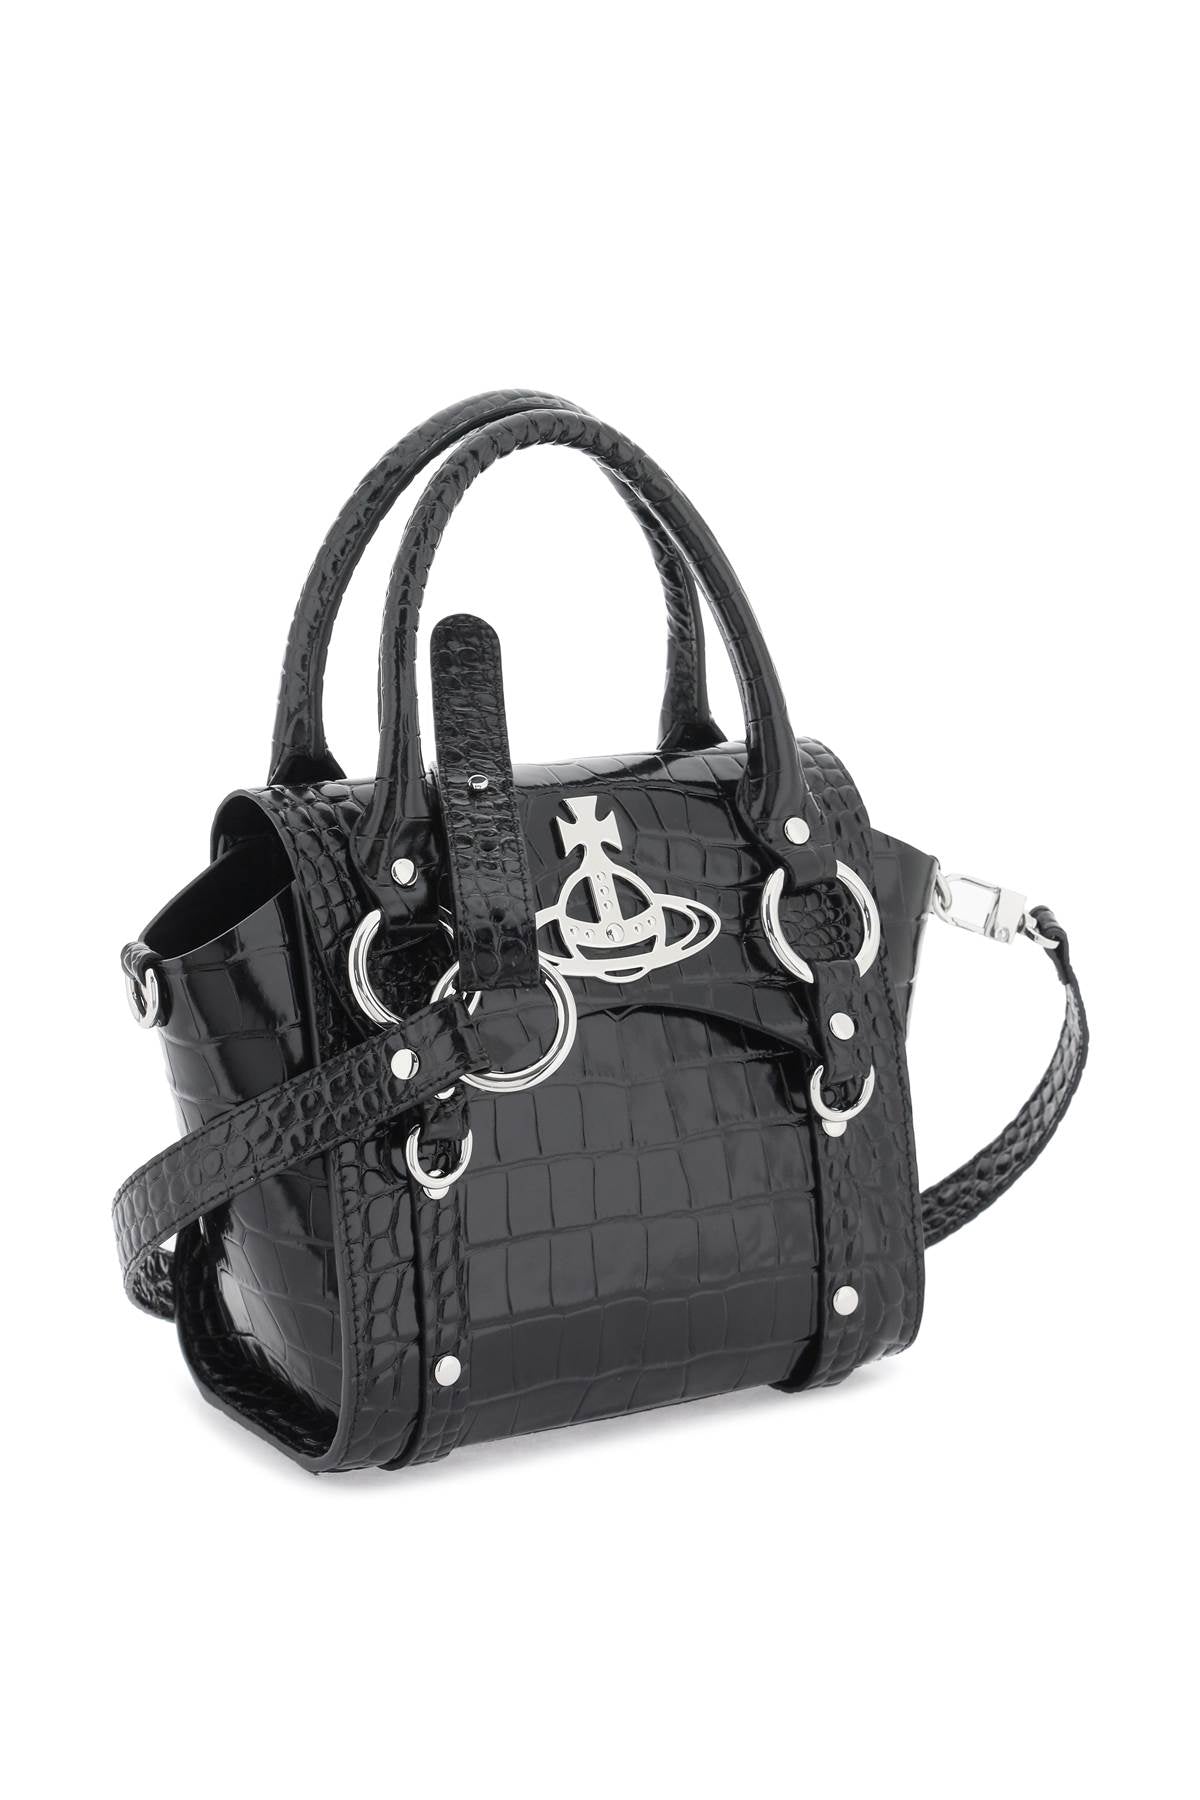 VIVIENNE WESTWOOD Small Betty Croco-Embossed Leather Handbag with Iconic Silver Orb - Black